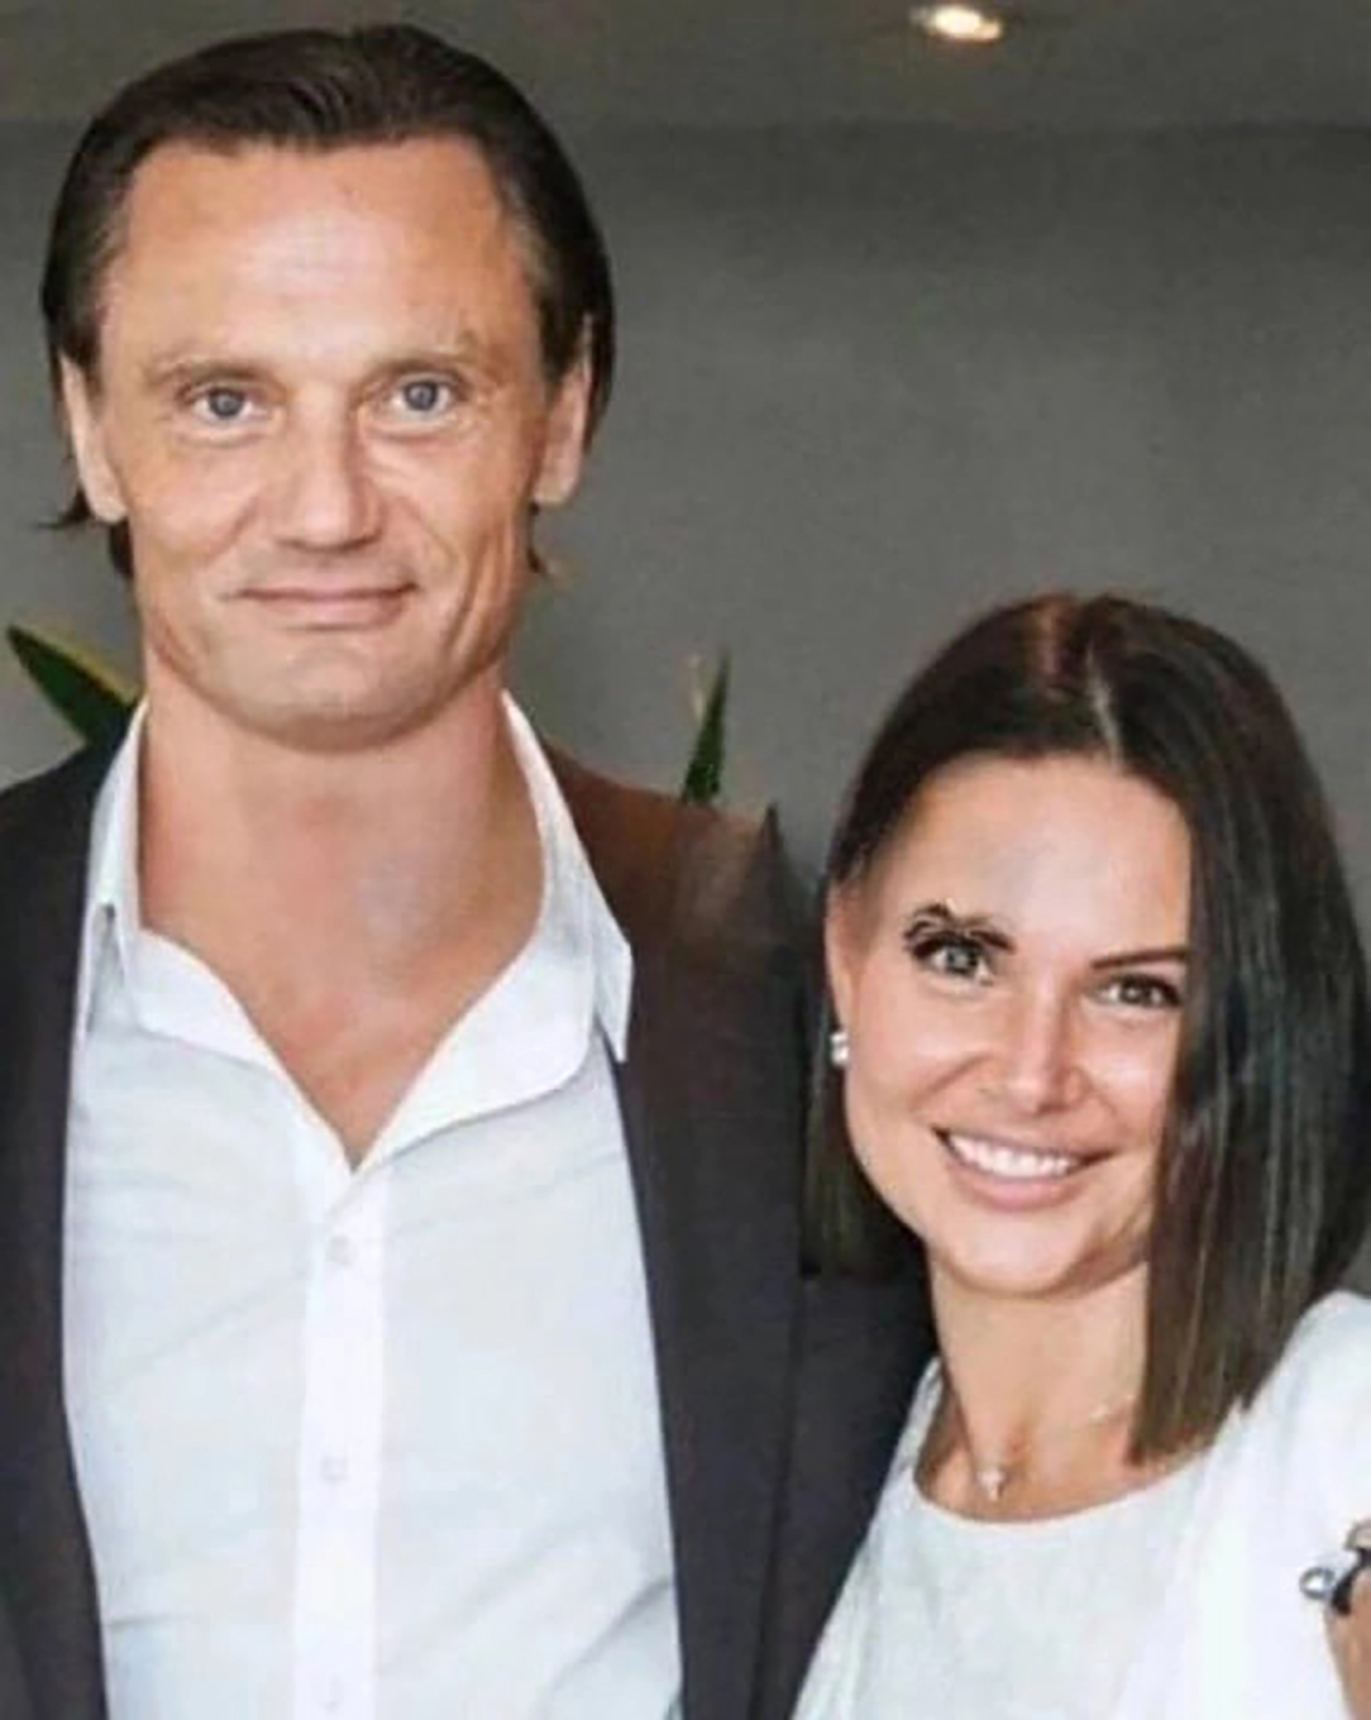 The model's  ex- husband Andrey Kuslevich has been named as a suspect